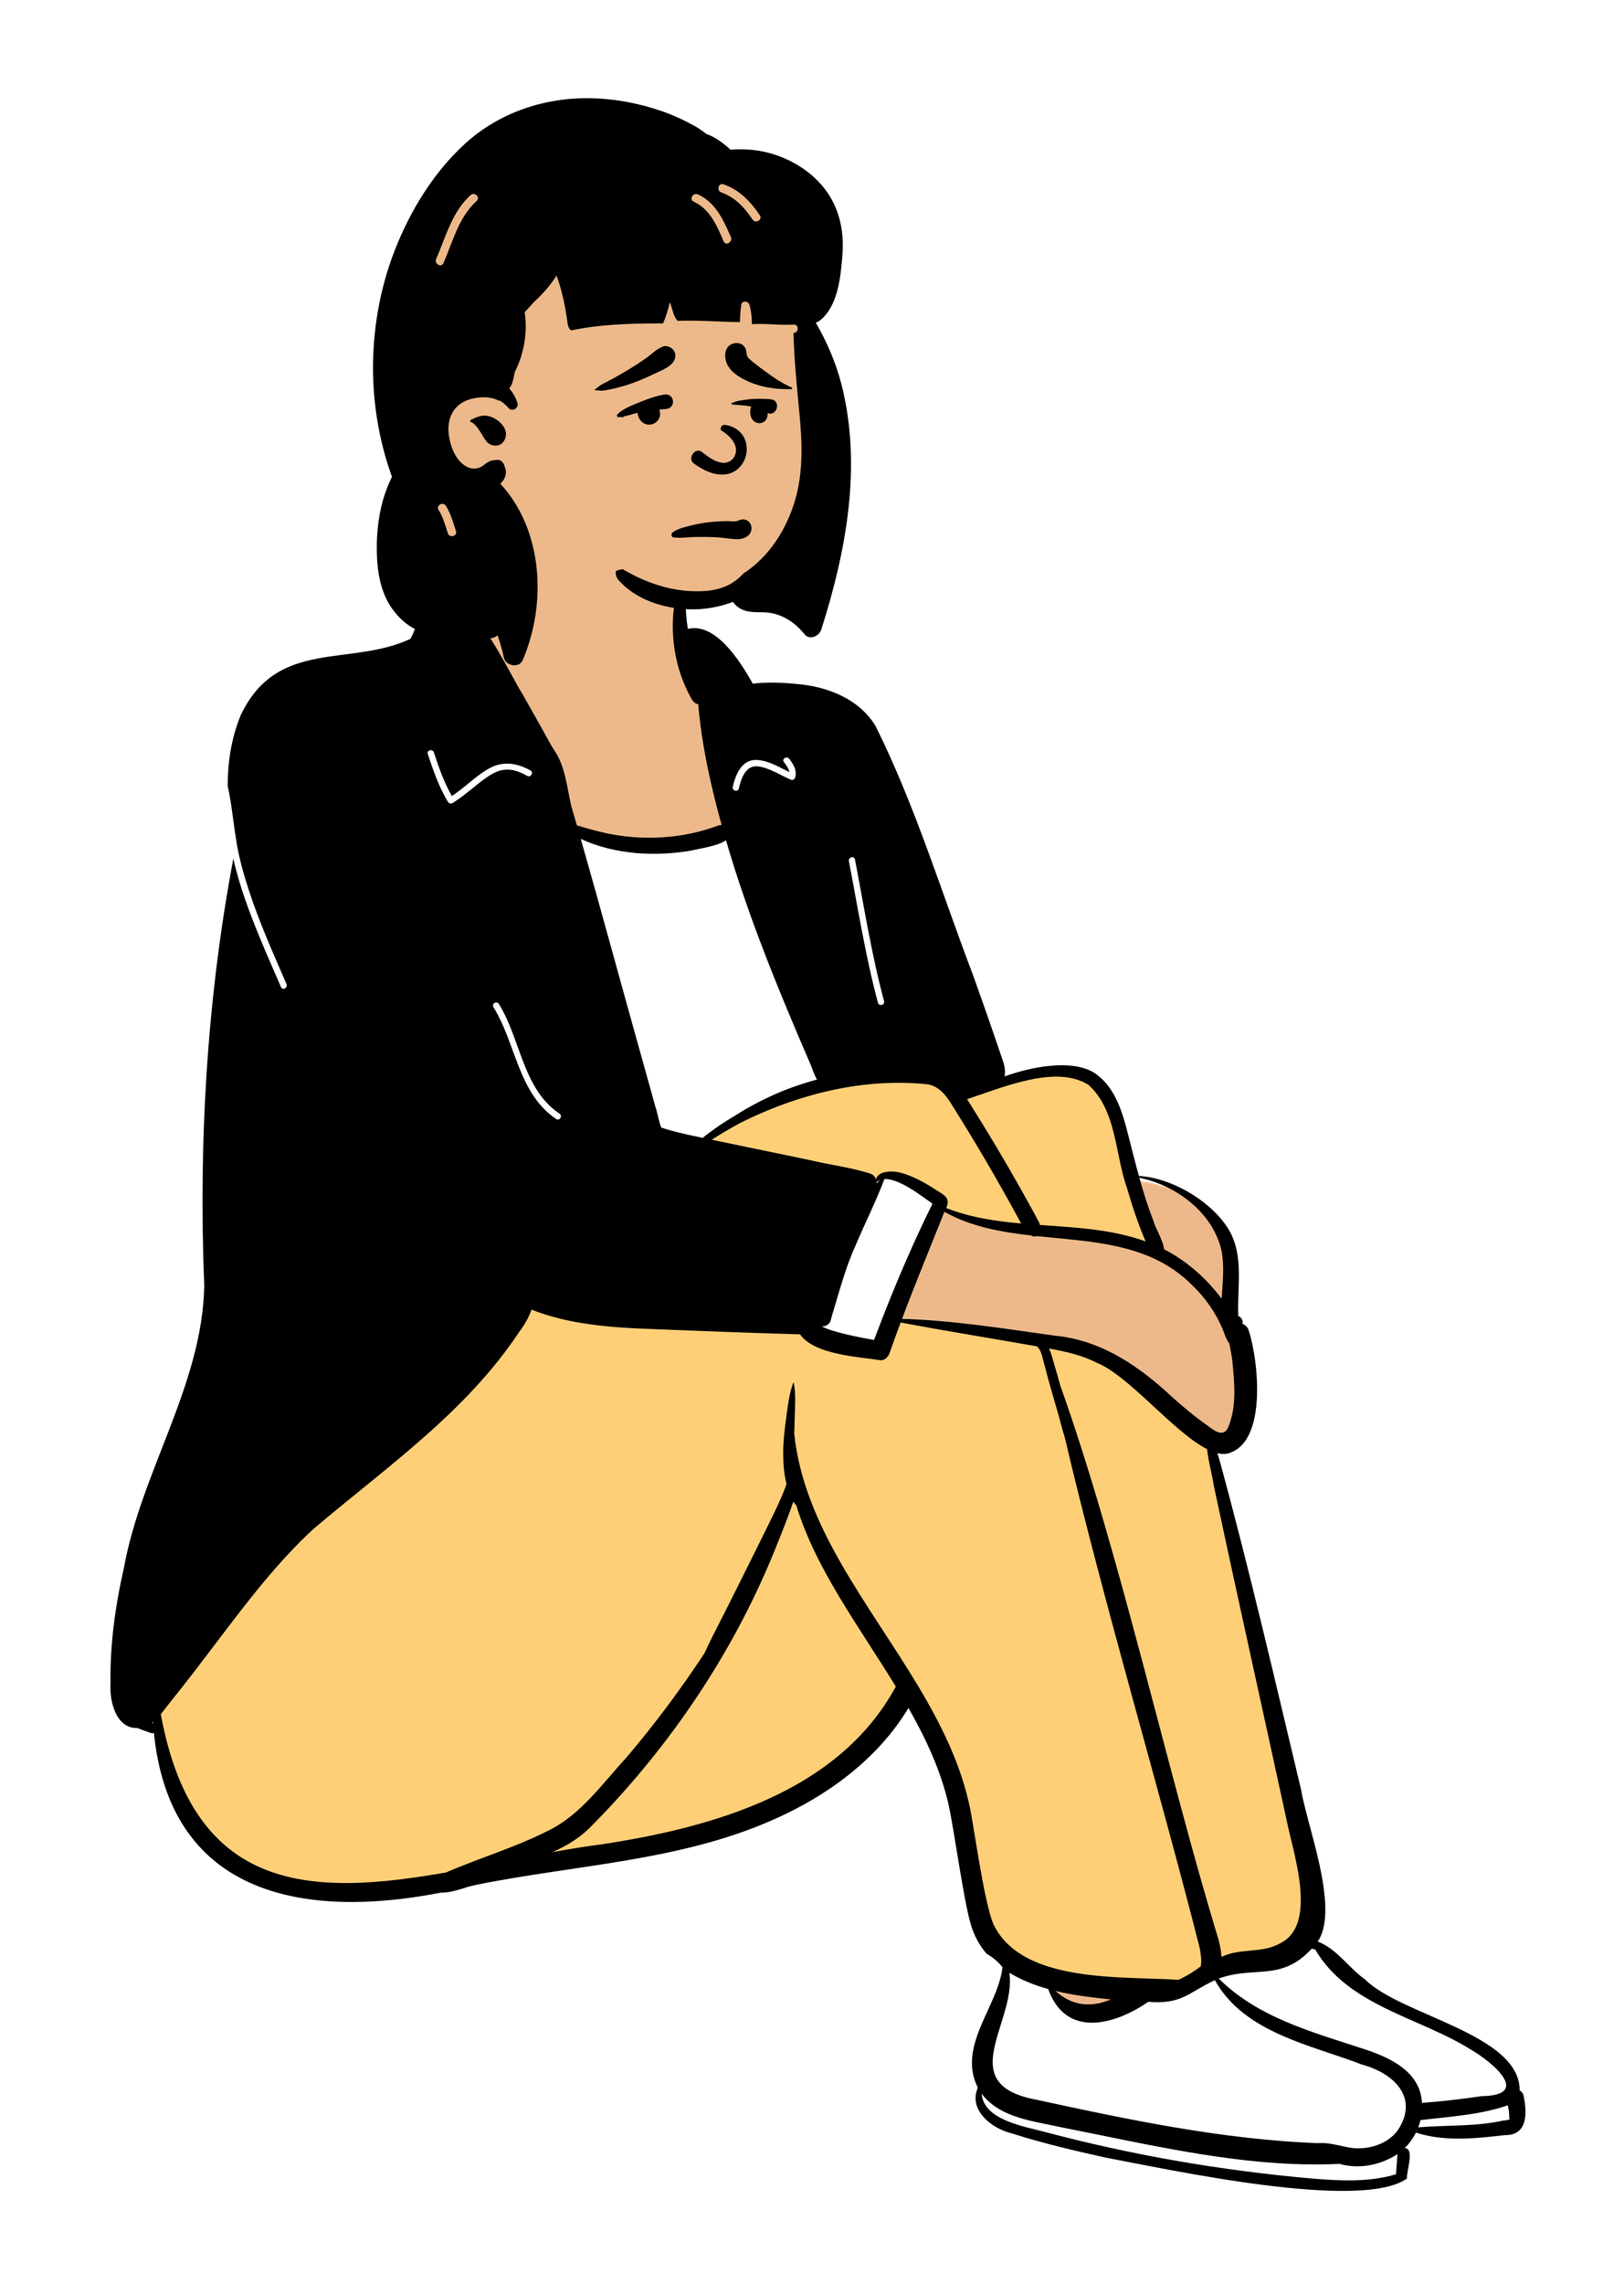 Illustration of woman sitting on floor with a sad, tired face